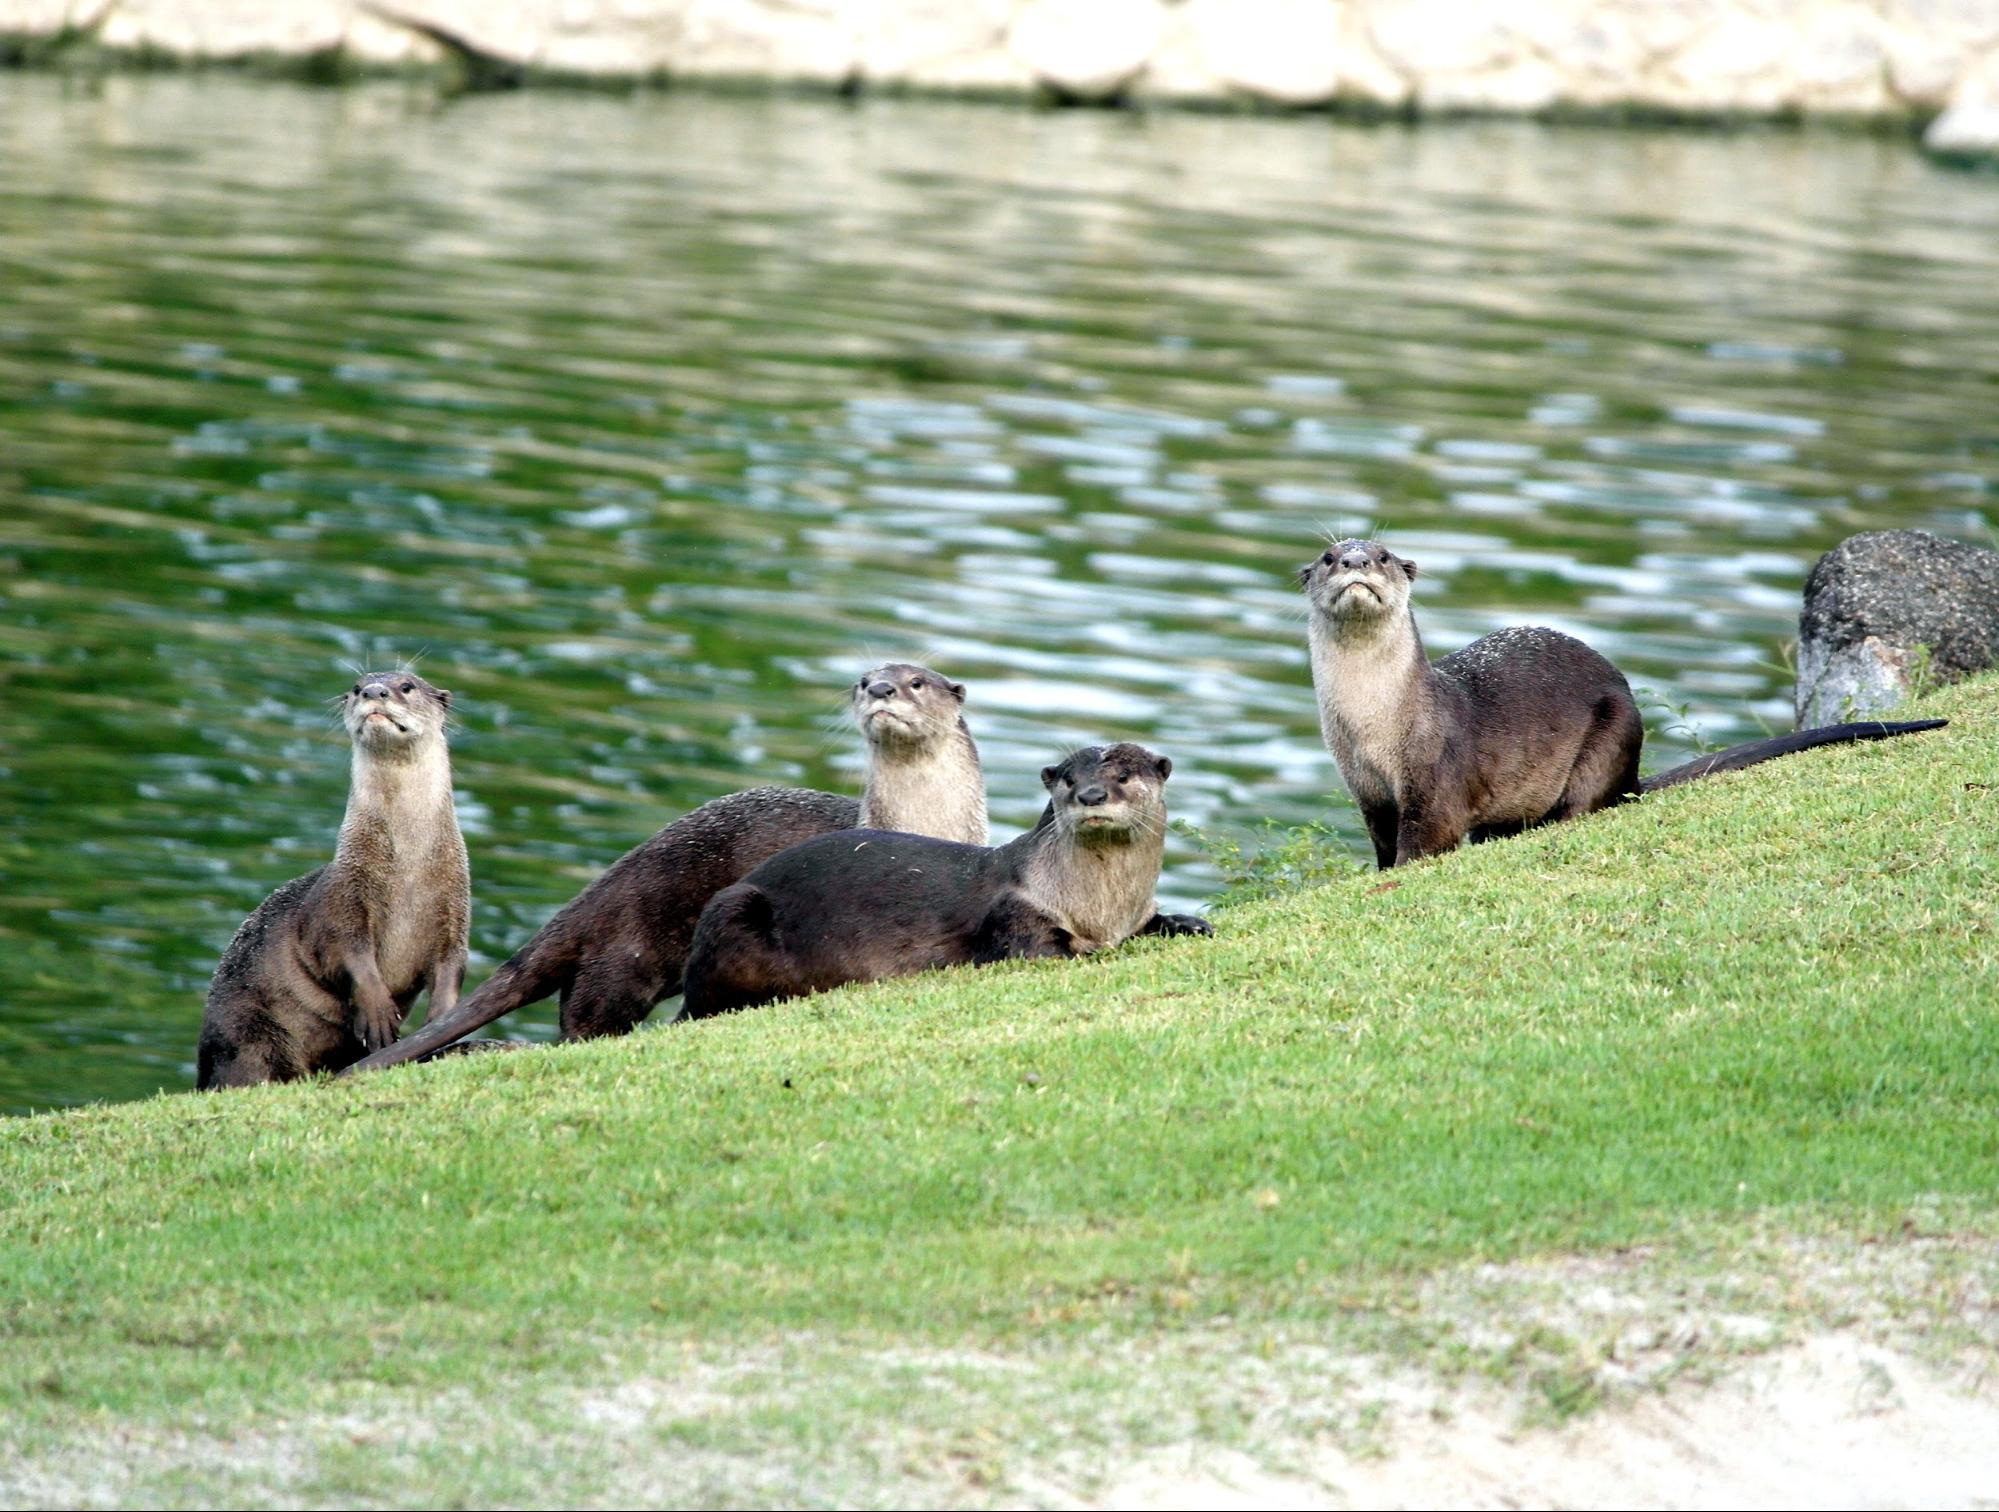 Singapore’s Love for Otters Reveals Its Double-Standards towards Wildlife in the City